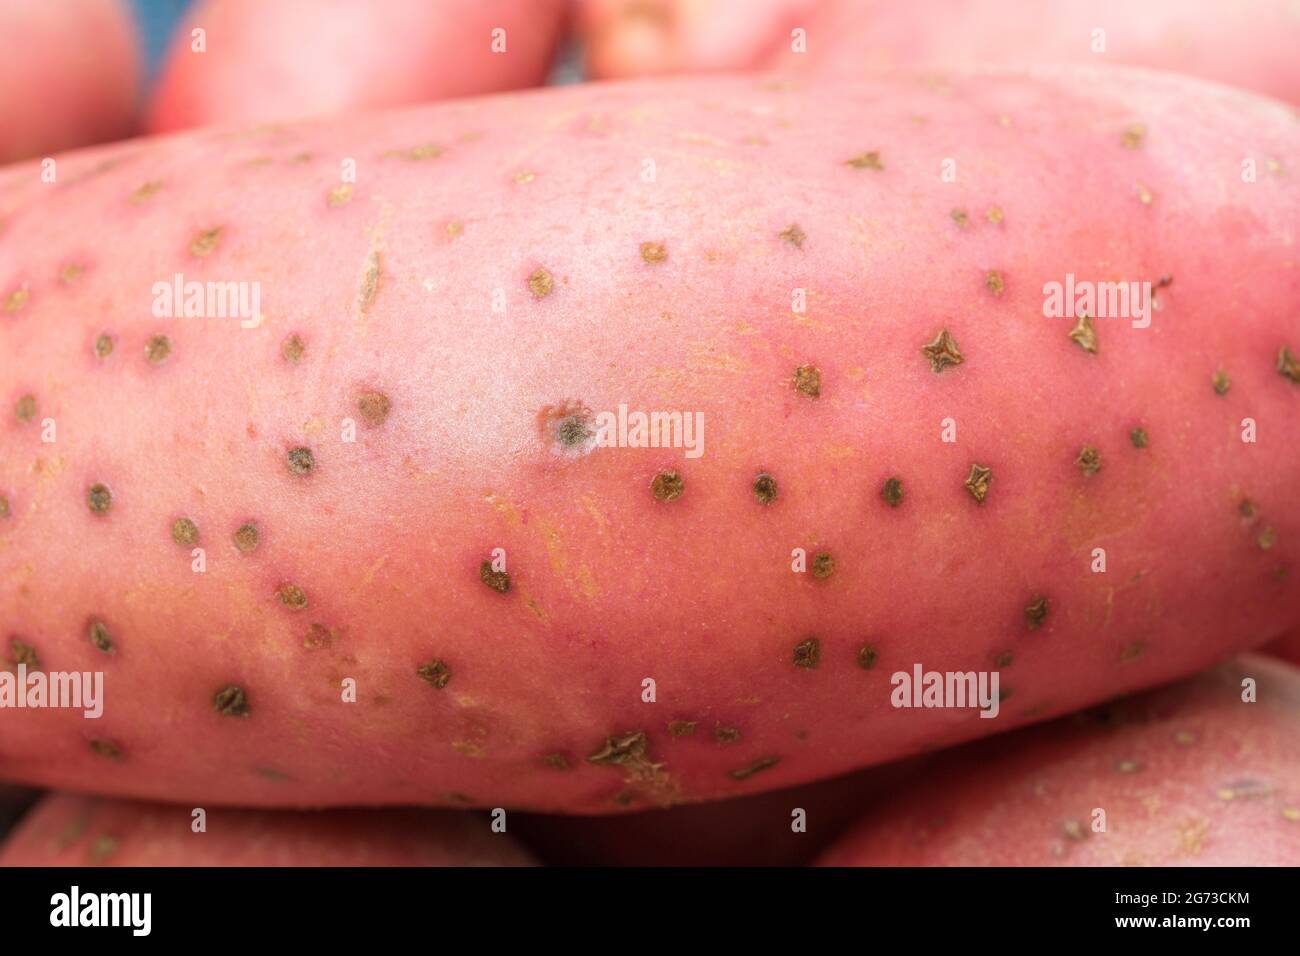 Red / russet potatoes grown in the UK. The potatoes have some disease present [which may be early stages of common scab, or perhaps powdery scab]. Stock Photo